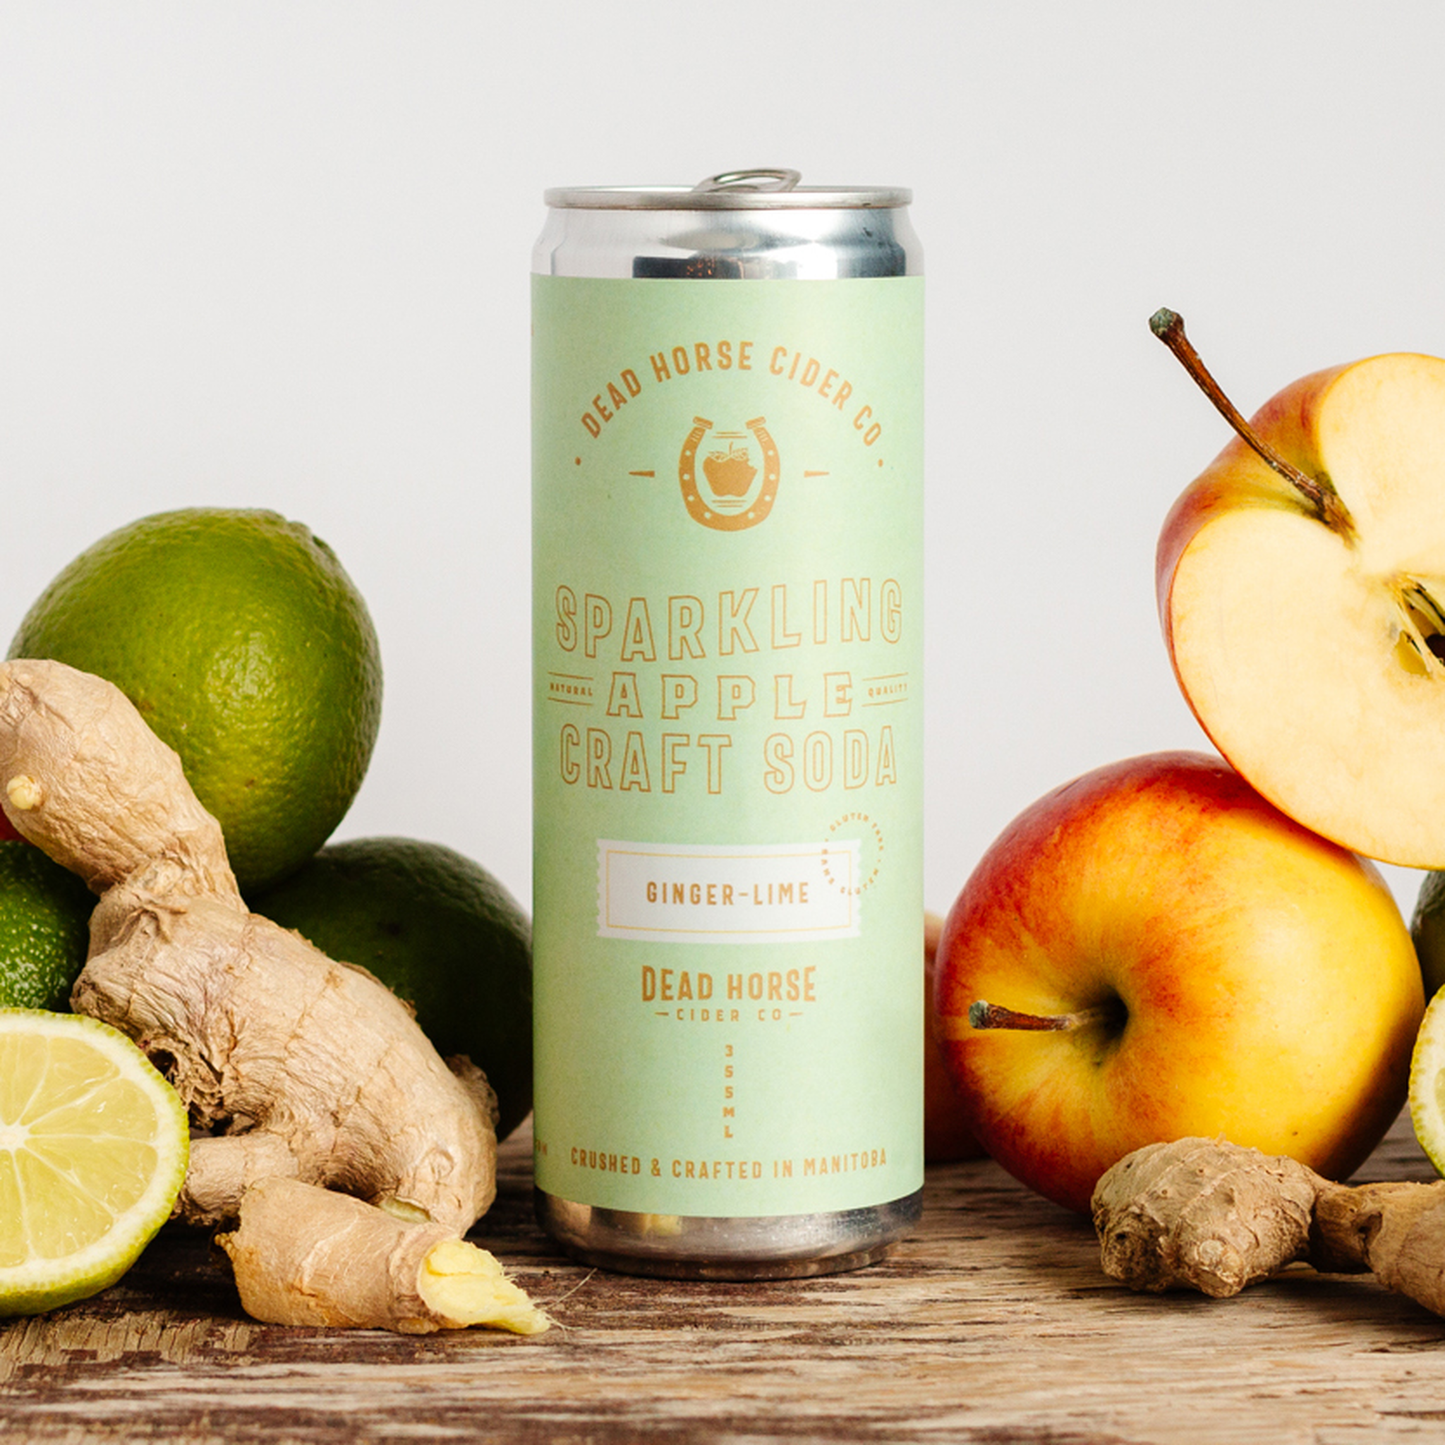 Alcohol free craft cider - apple, lime, ginger - delicious drinks - adult beverage without alcohol Canada